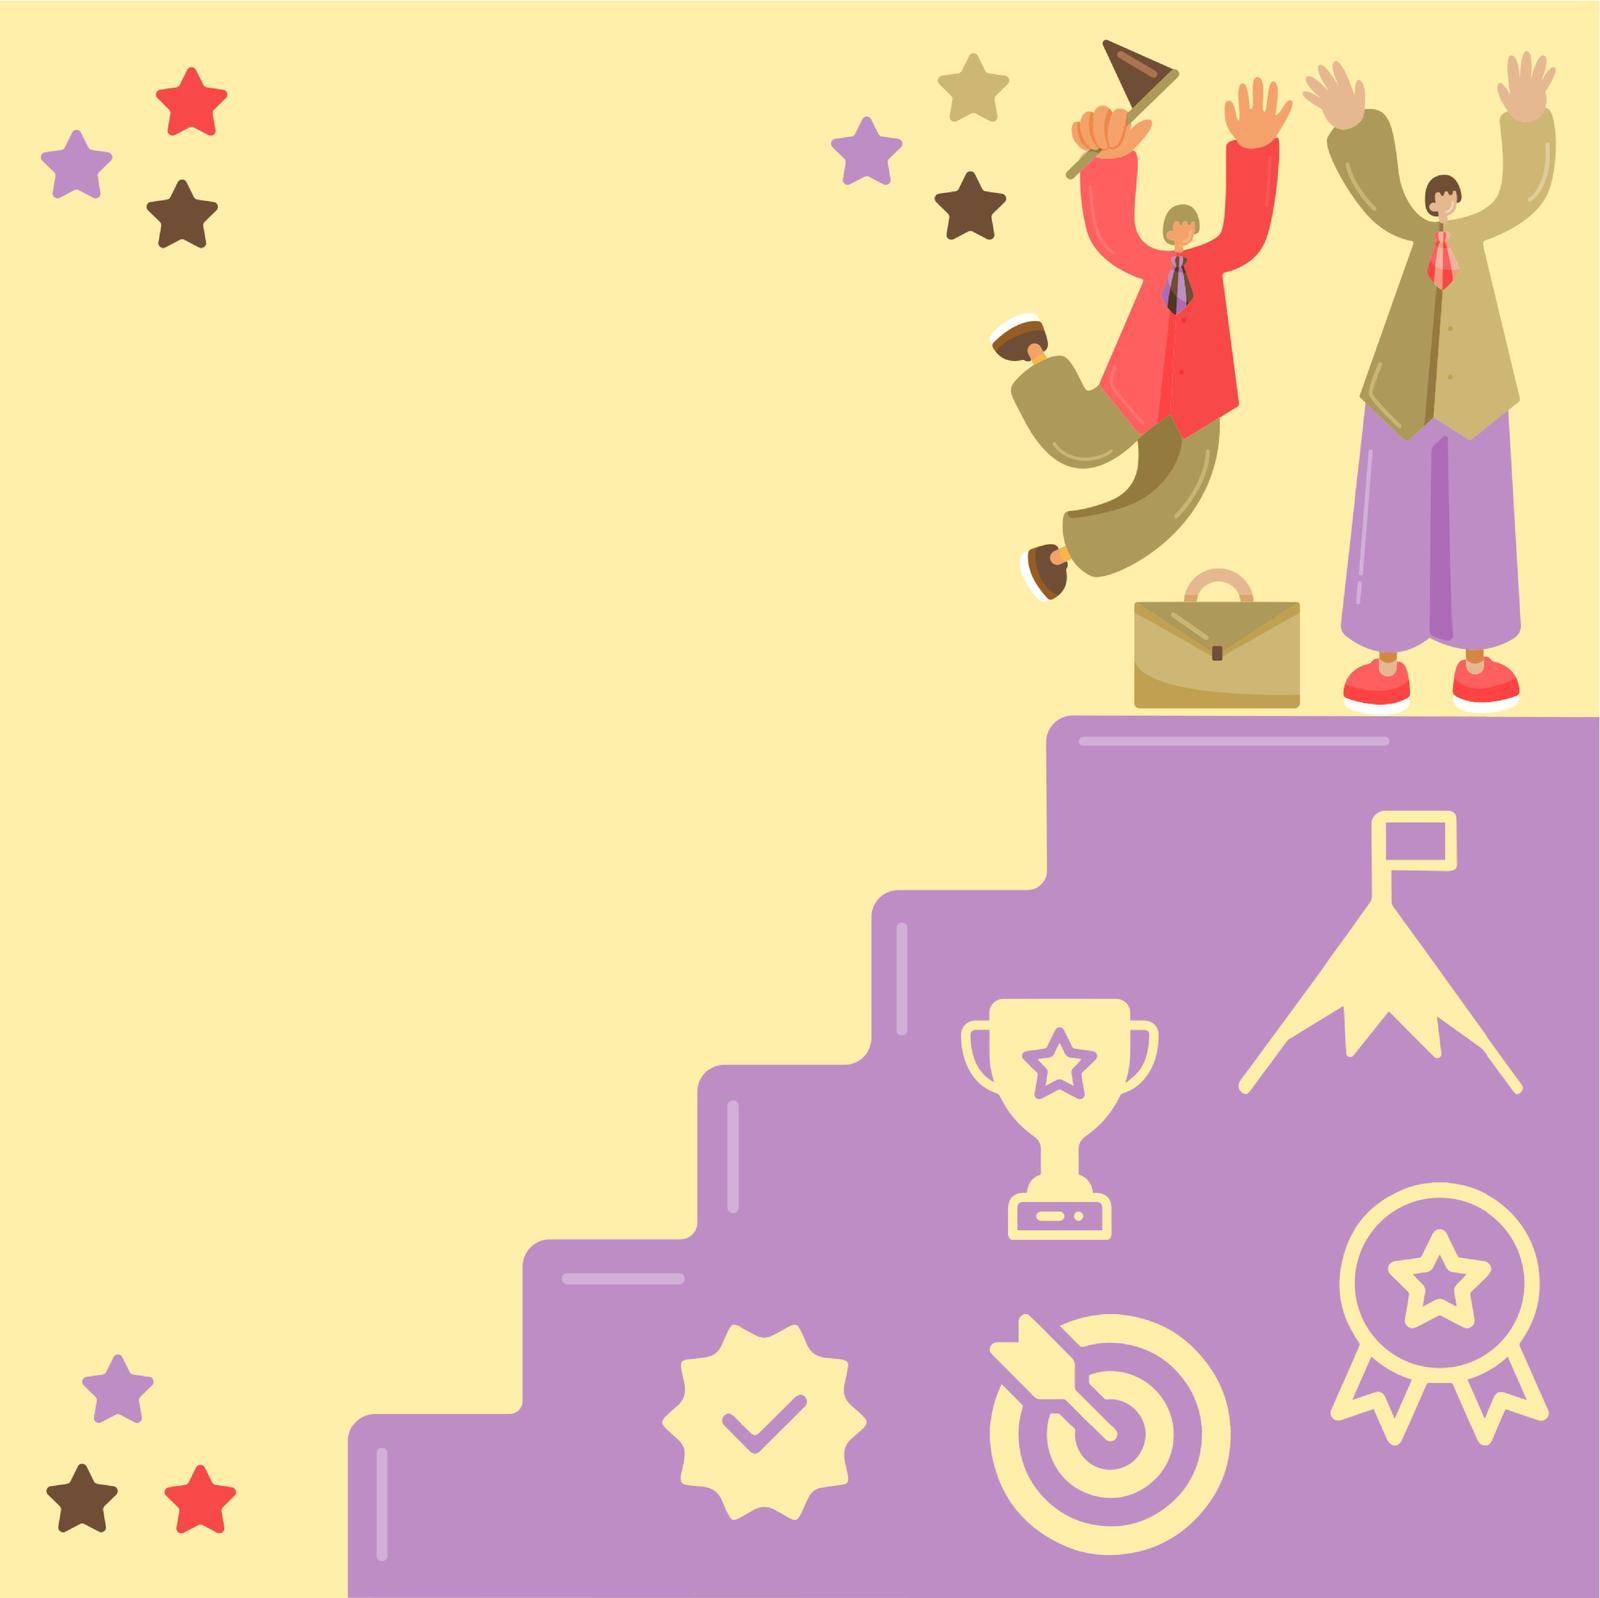 Success Stairscase With S Moving Up Celebrating Business Team. Cartoon Drawing Achievement Symbol Scale Rising Up Coworkers Competition. by nialowwa